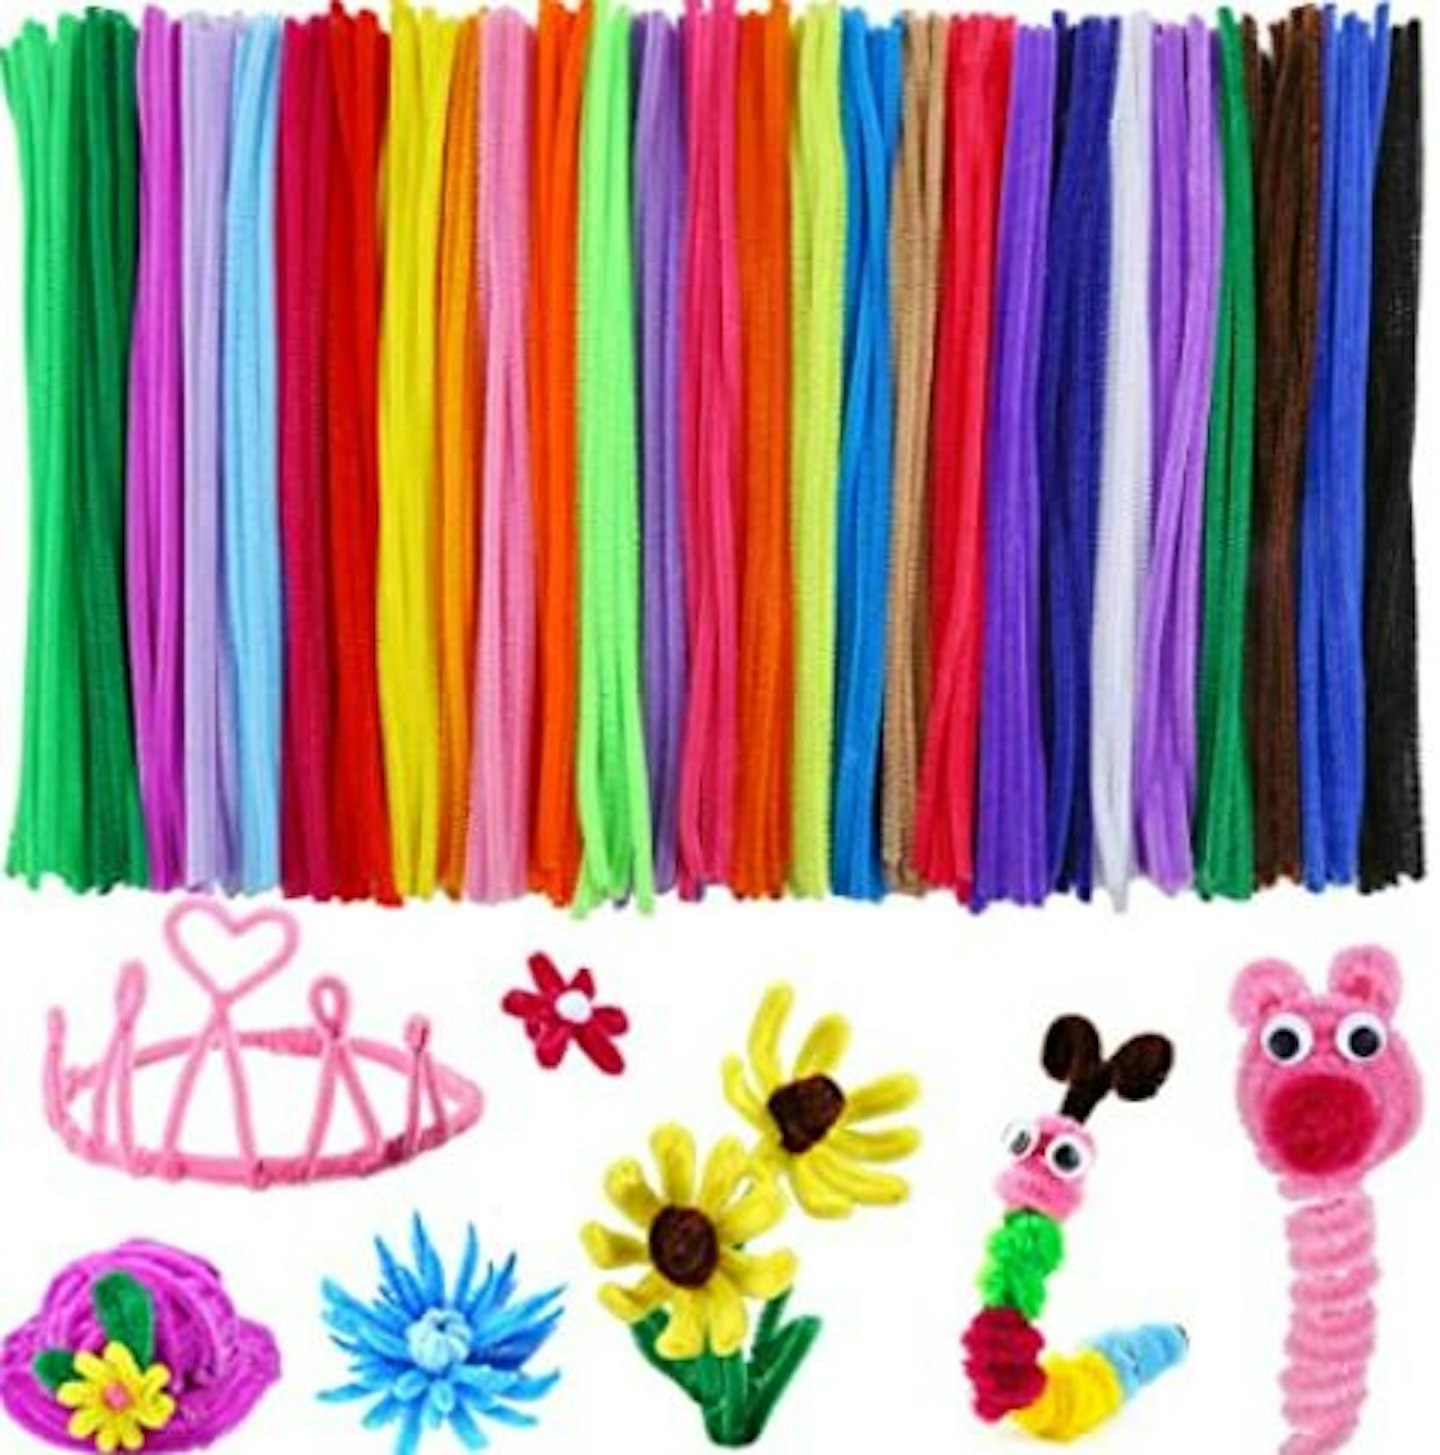 PIpe cleaners